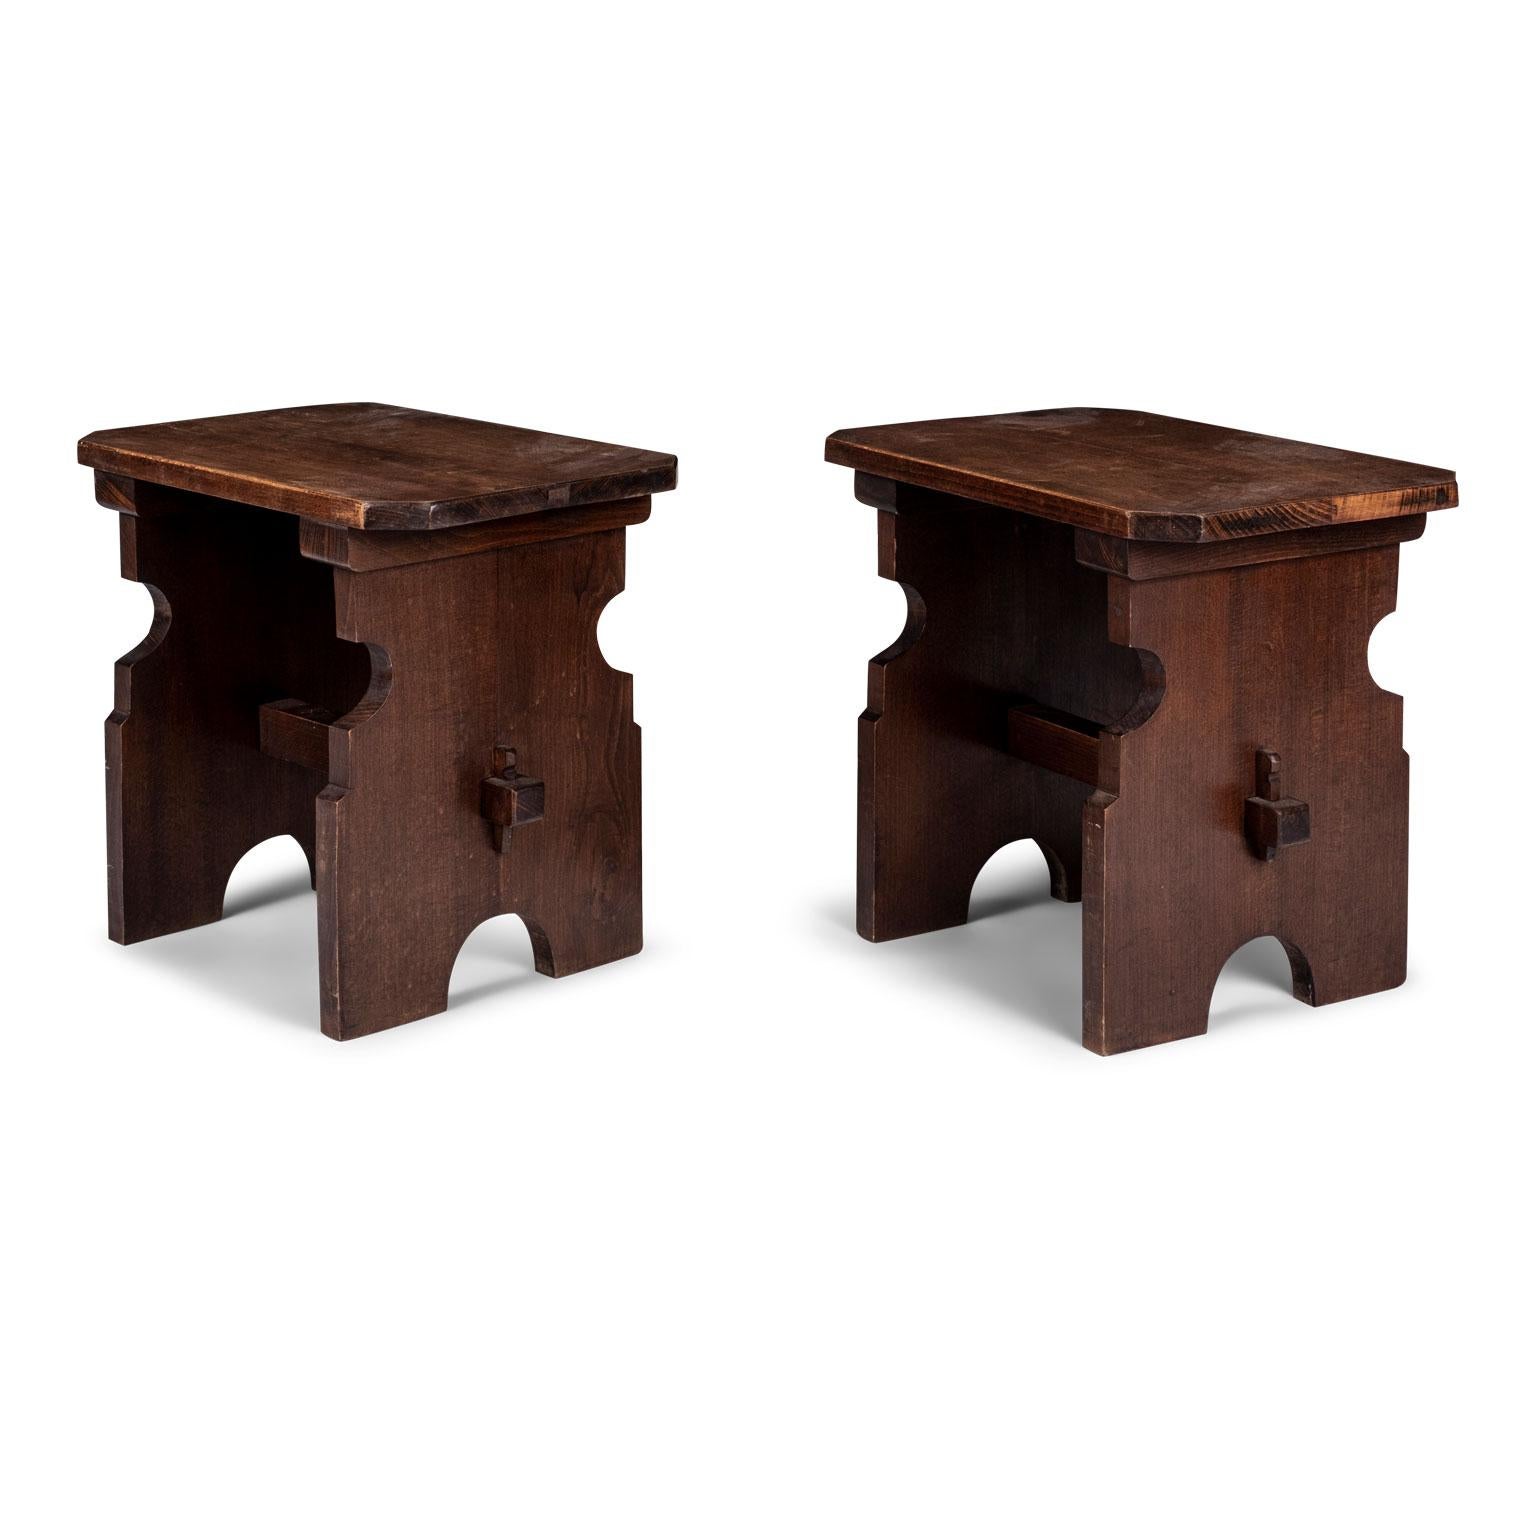 Pair of English oak Arts & Crafts stools constructed, circa 1900. Sold together and priced as a pair at $3,800.